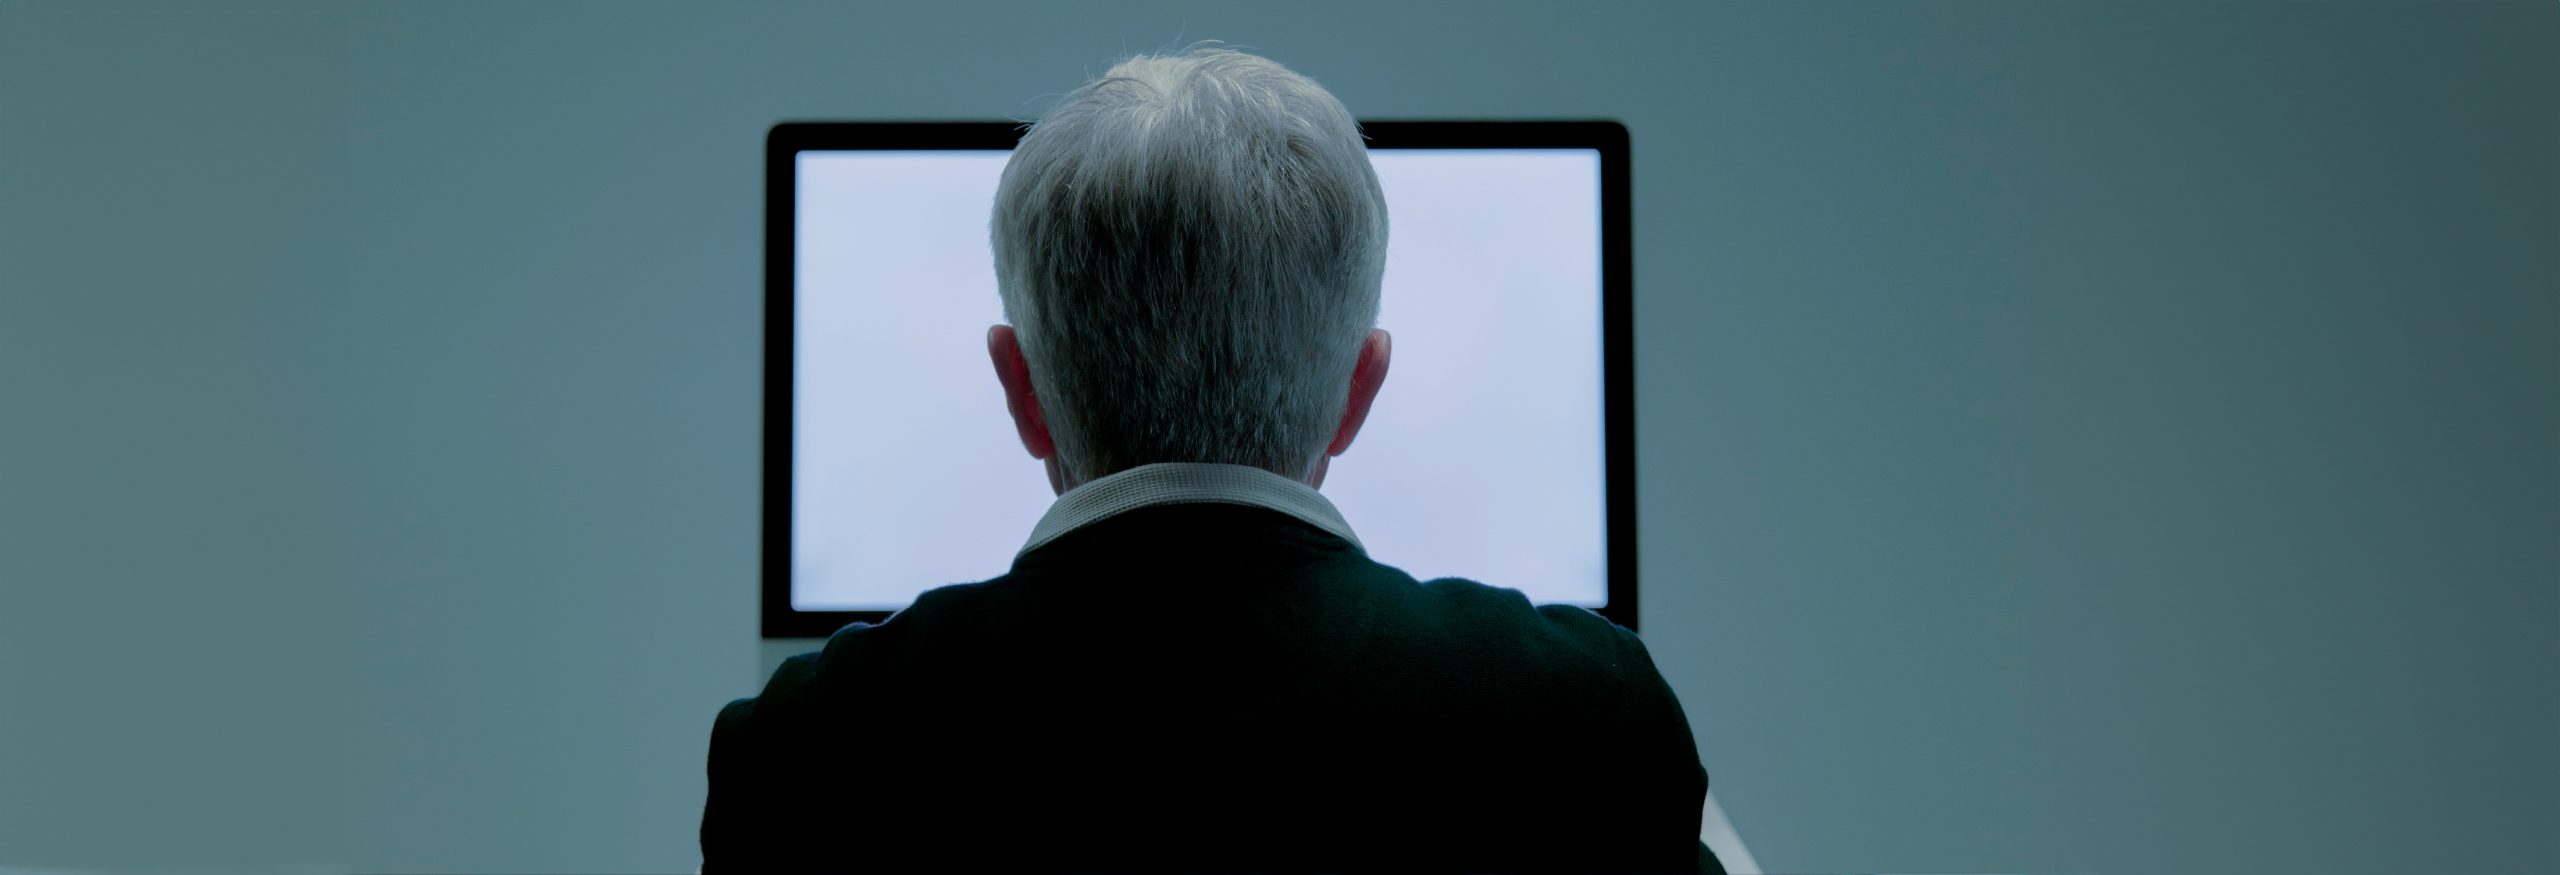 The back of an elderly man who is sitting in front of white monitor.